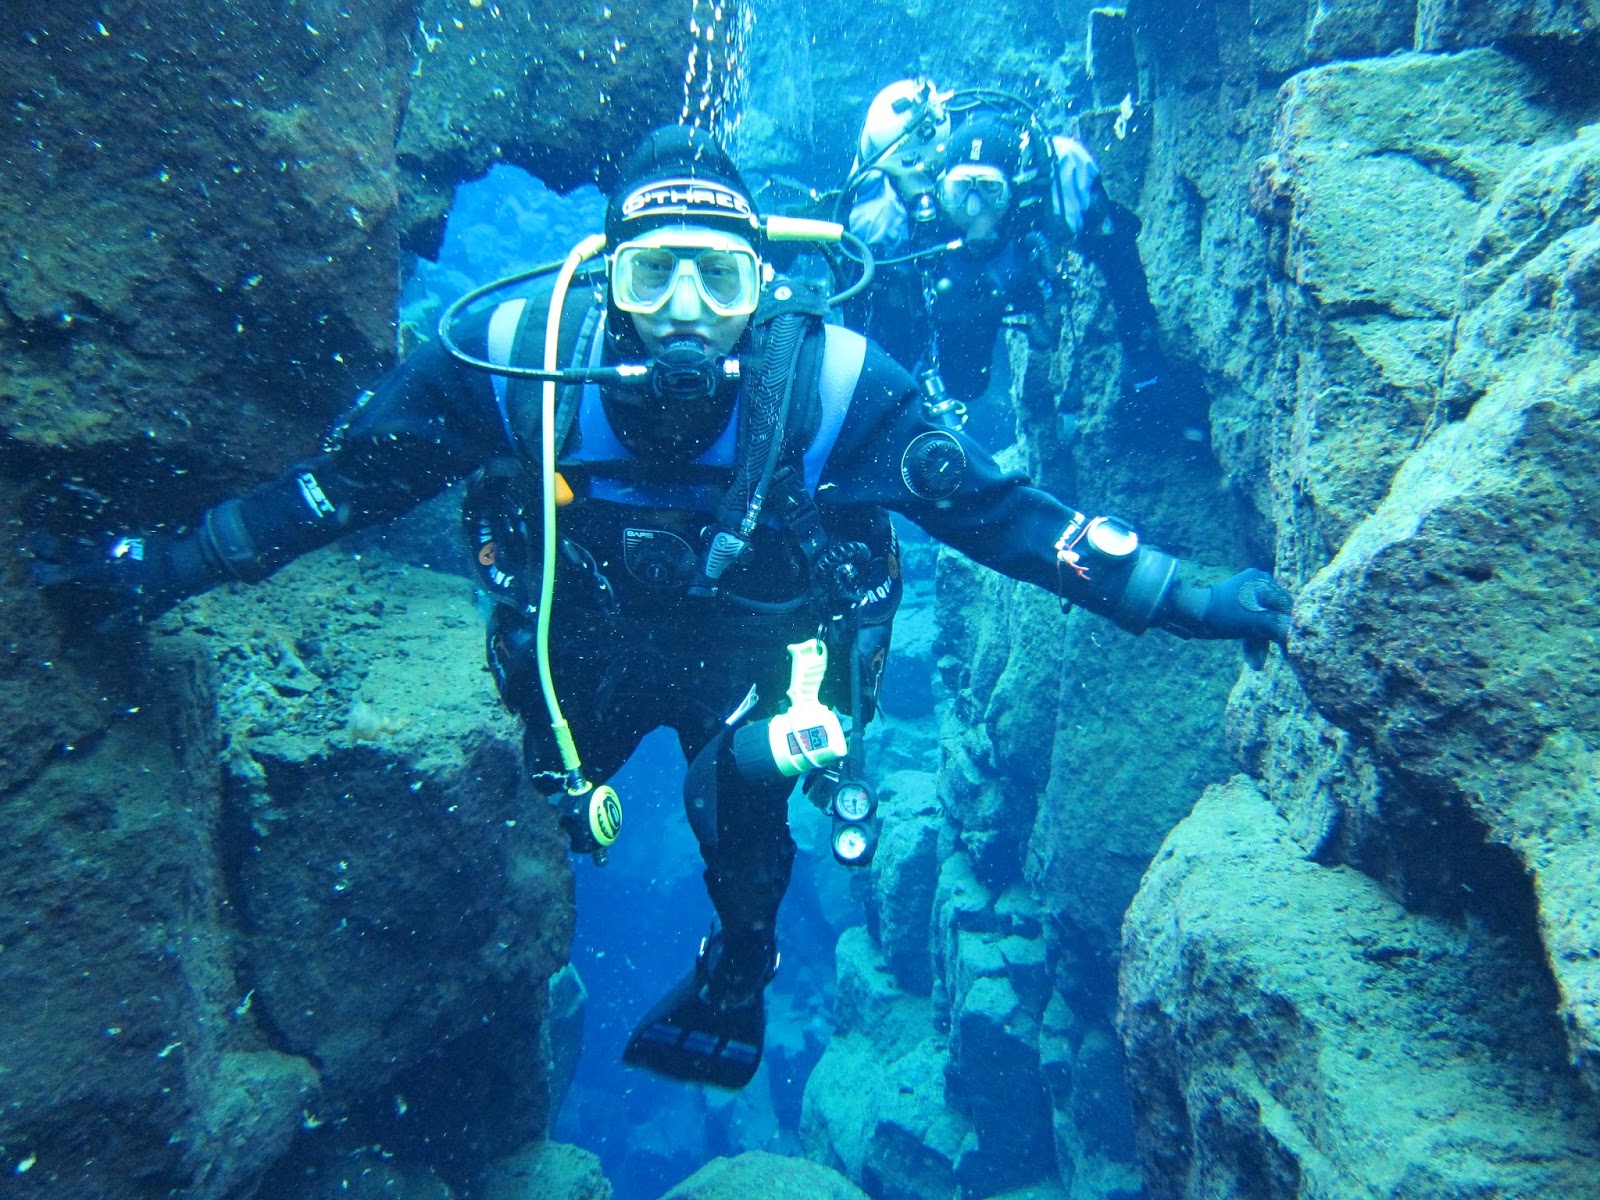 Between the Eurasian and North American plates